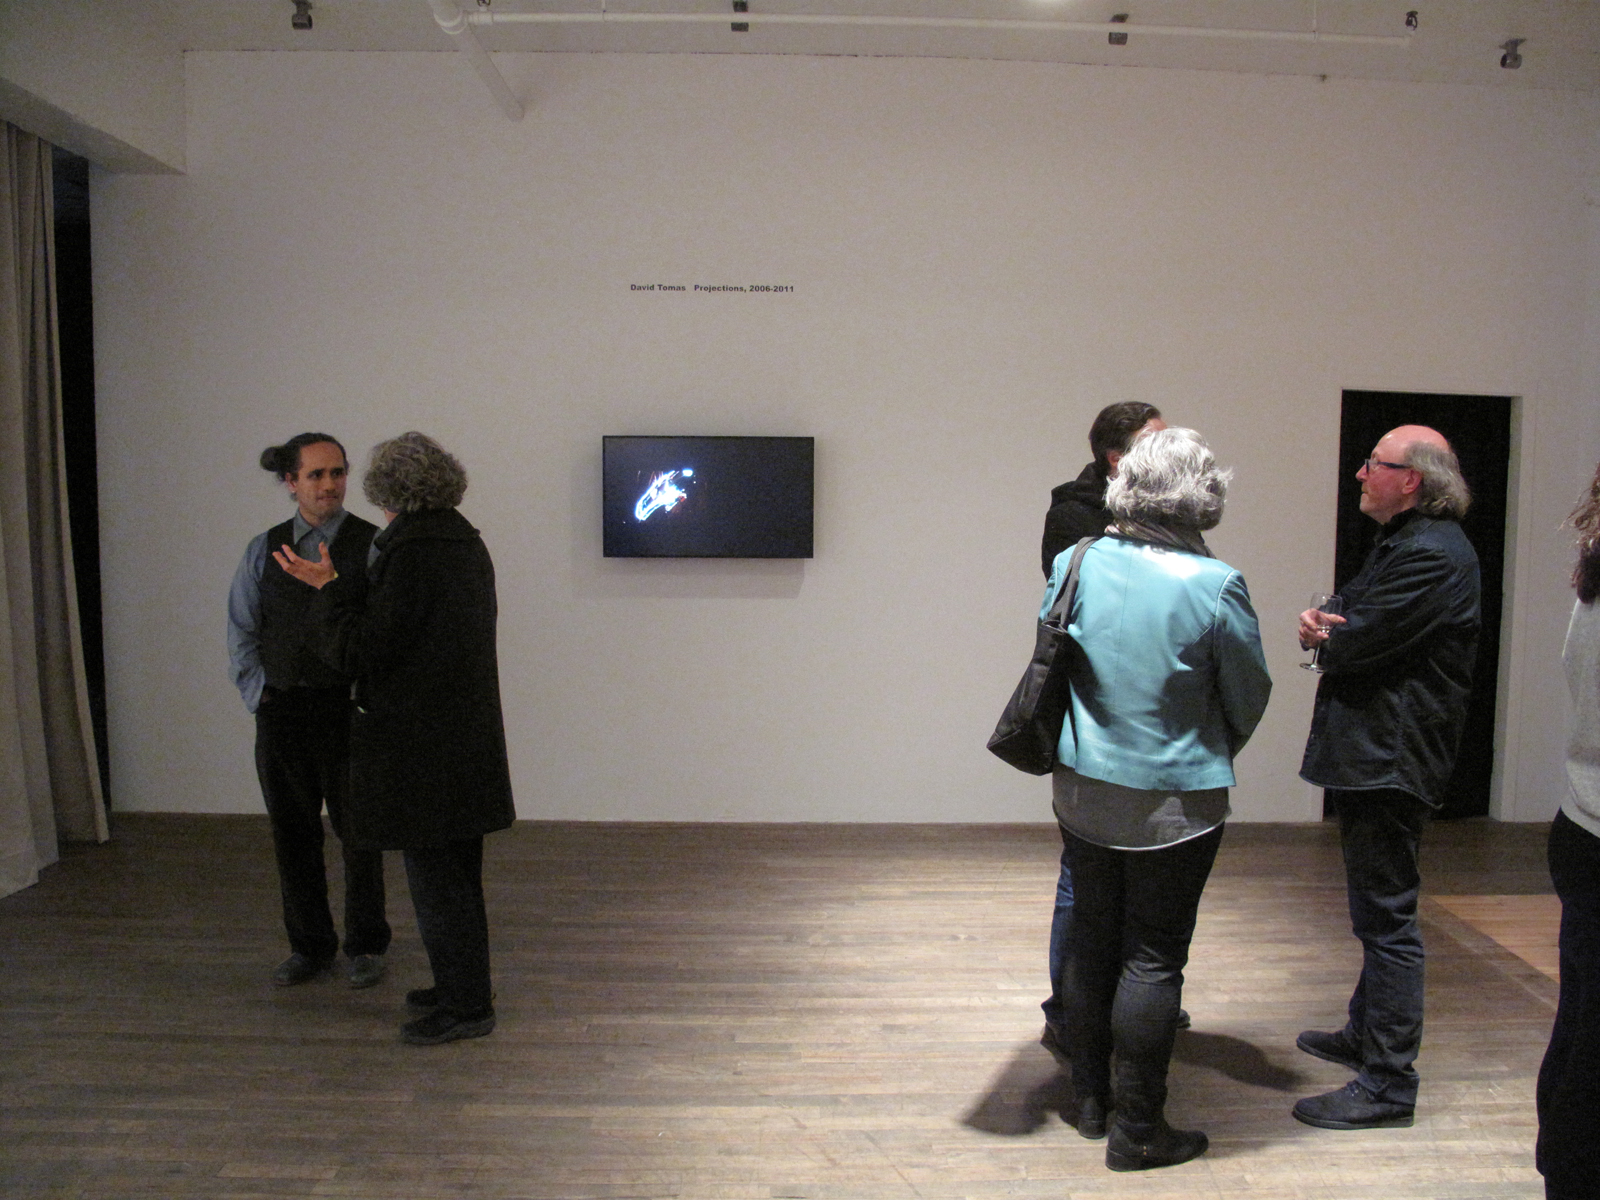 Projections, 2006-2011 - Opening Pictures